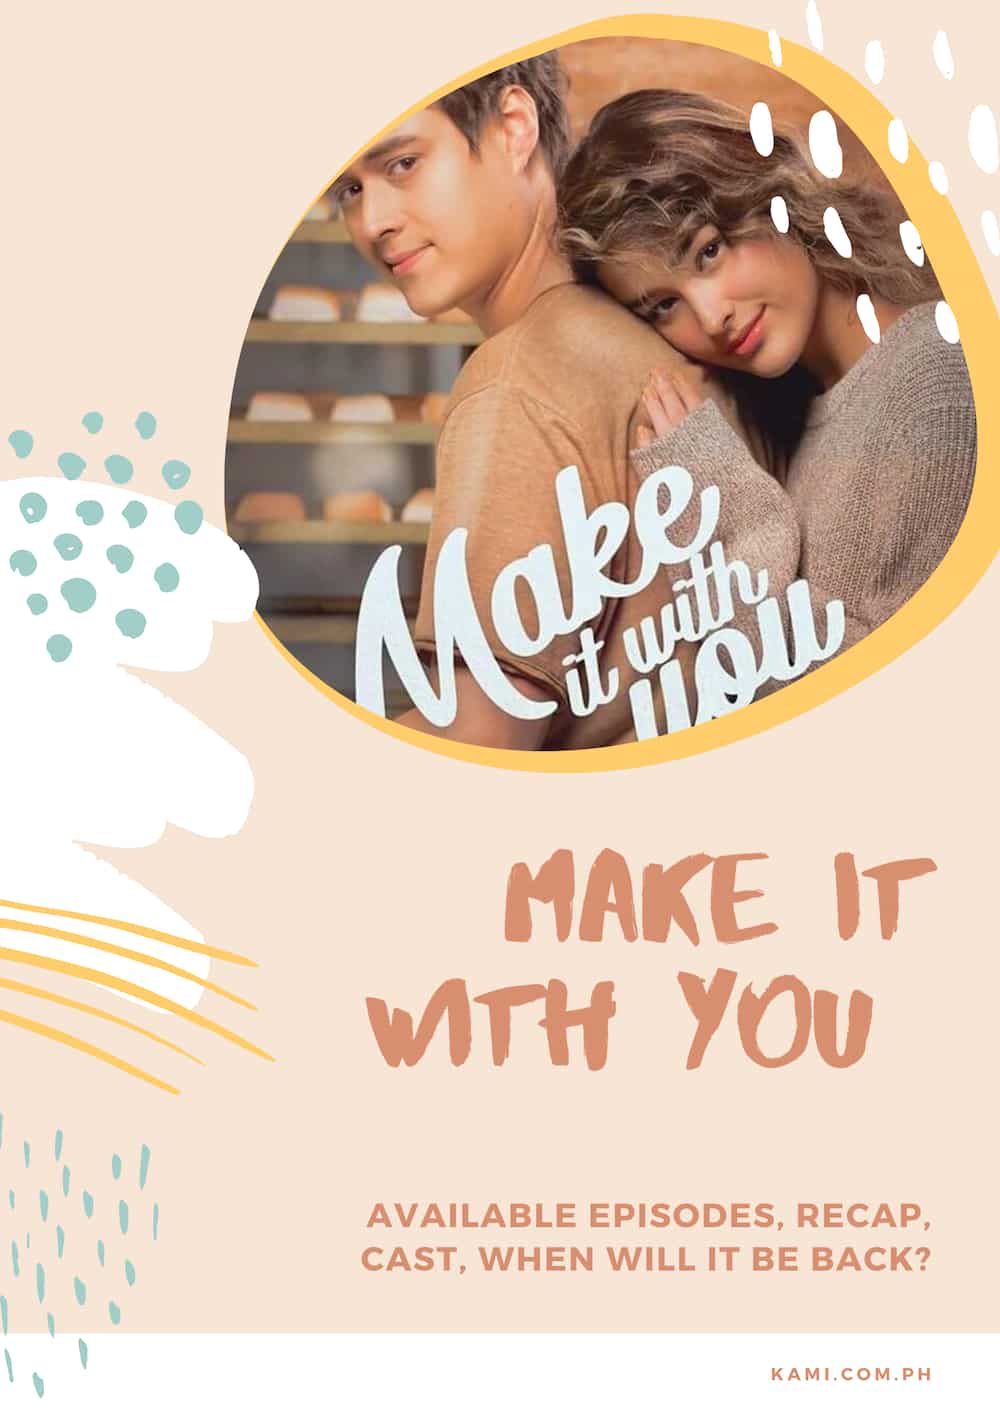 Make It With You available episodes, recap, cast, when will it be back?